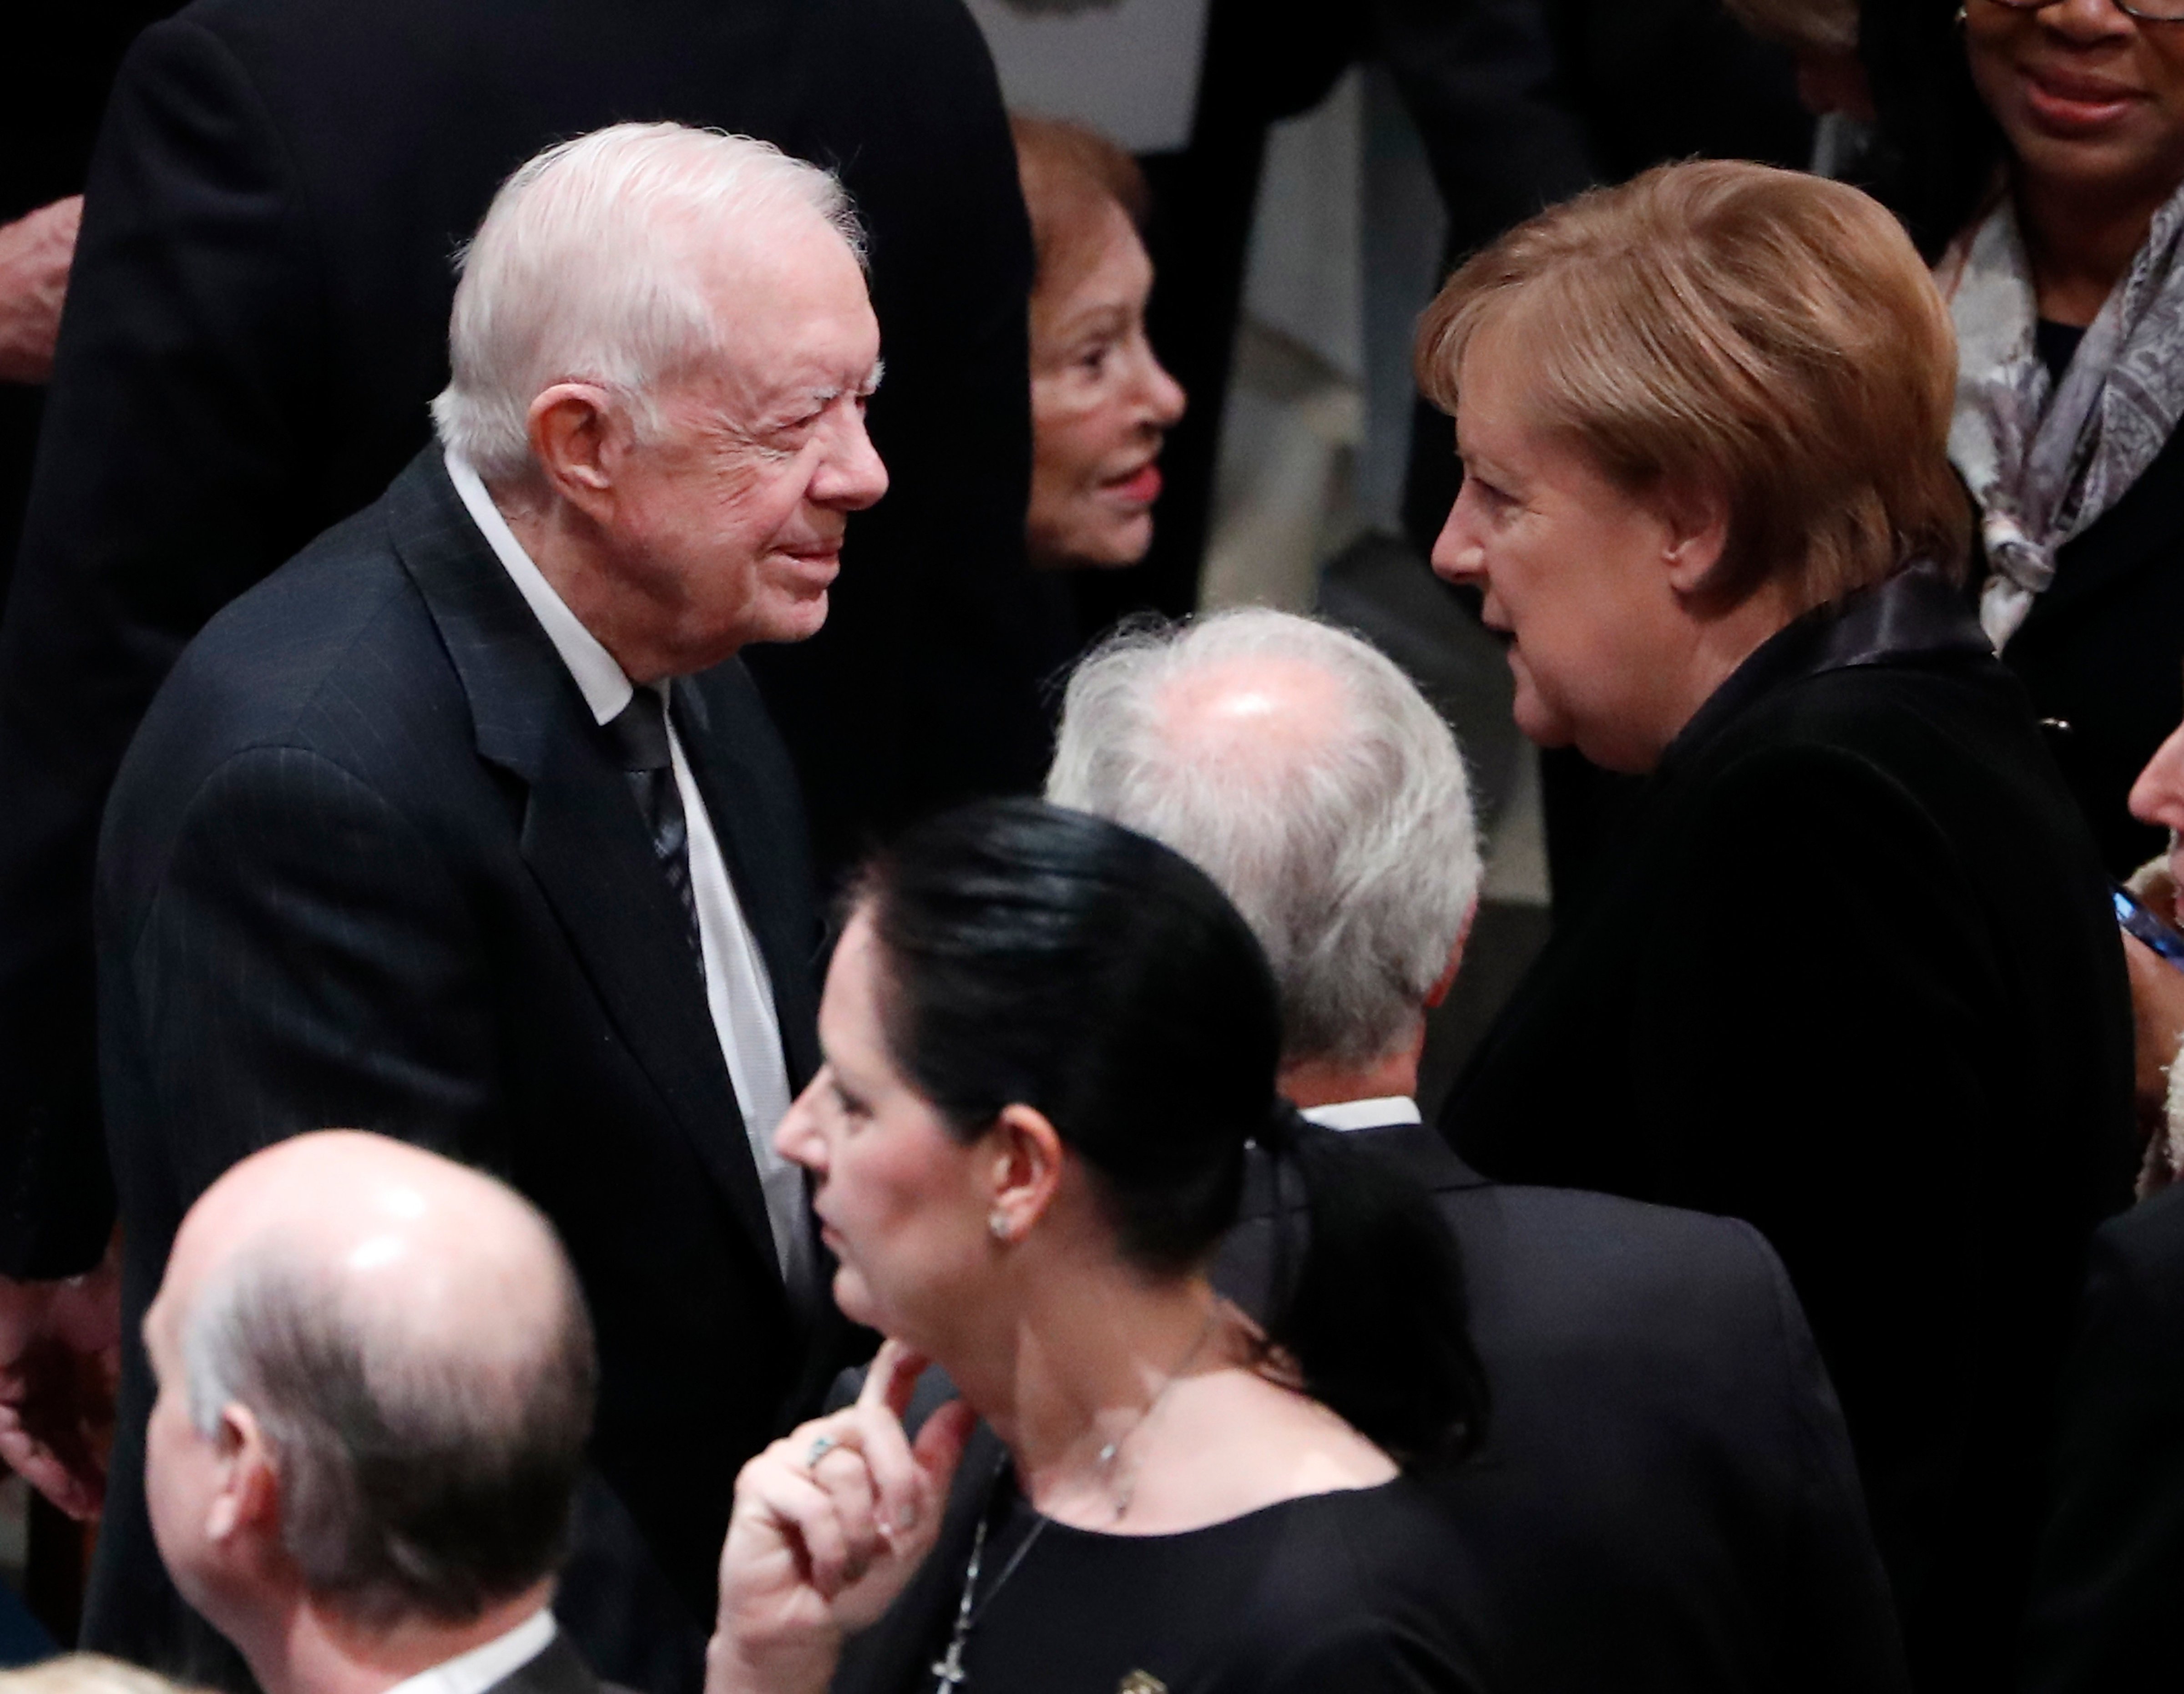 Former United States President Jimmy Carter talks with German Chancellor Angela Merkel as they arrive for the funeral services for former United States President George H. W. Bush at the National Cathedral, in Washington, DC on Dec. 5, 2018. (Erik S. Lesser—EPA/EFE/REX/Shutterstock)